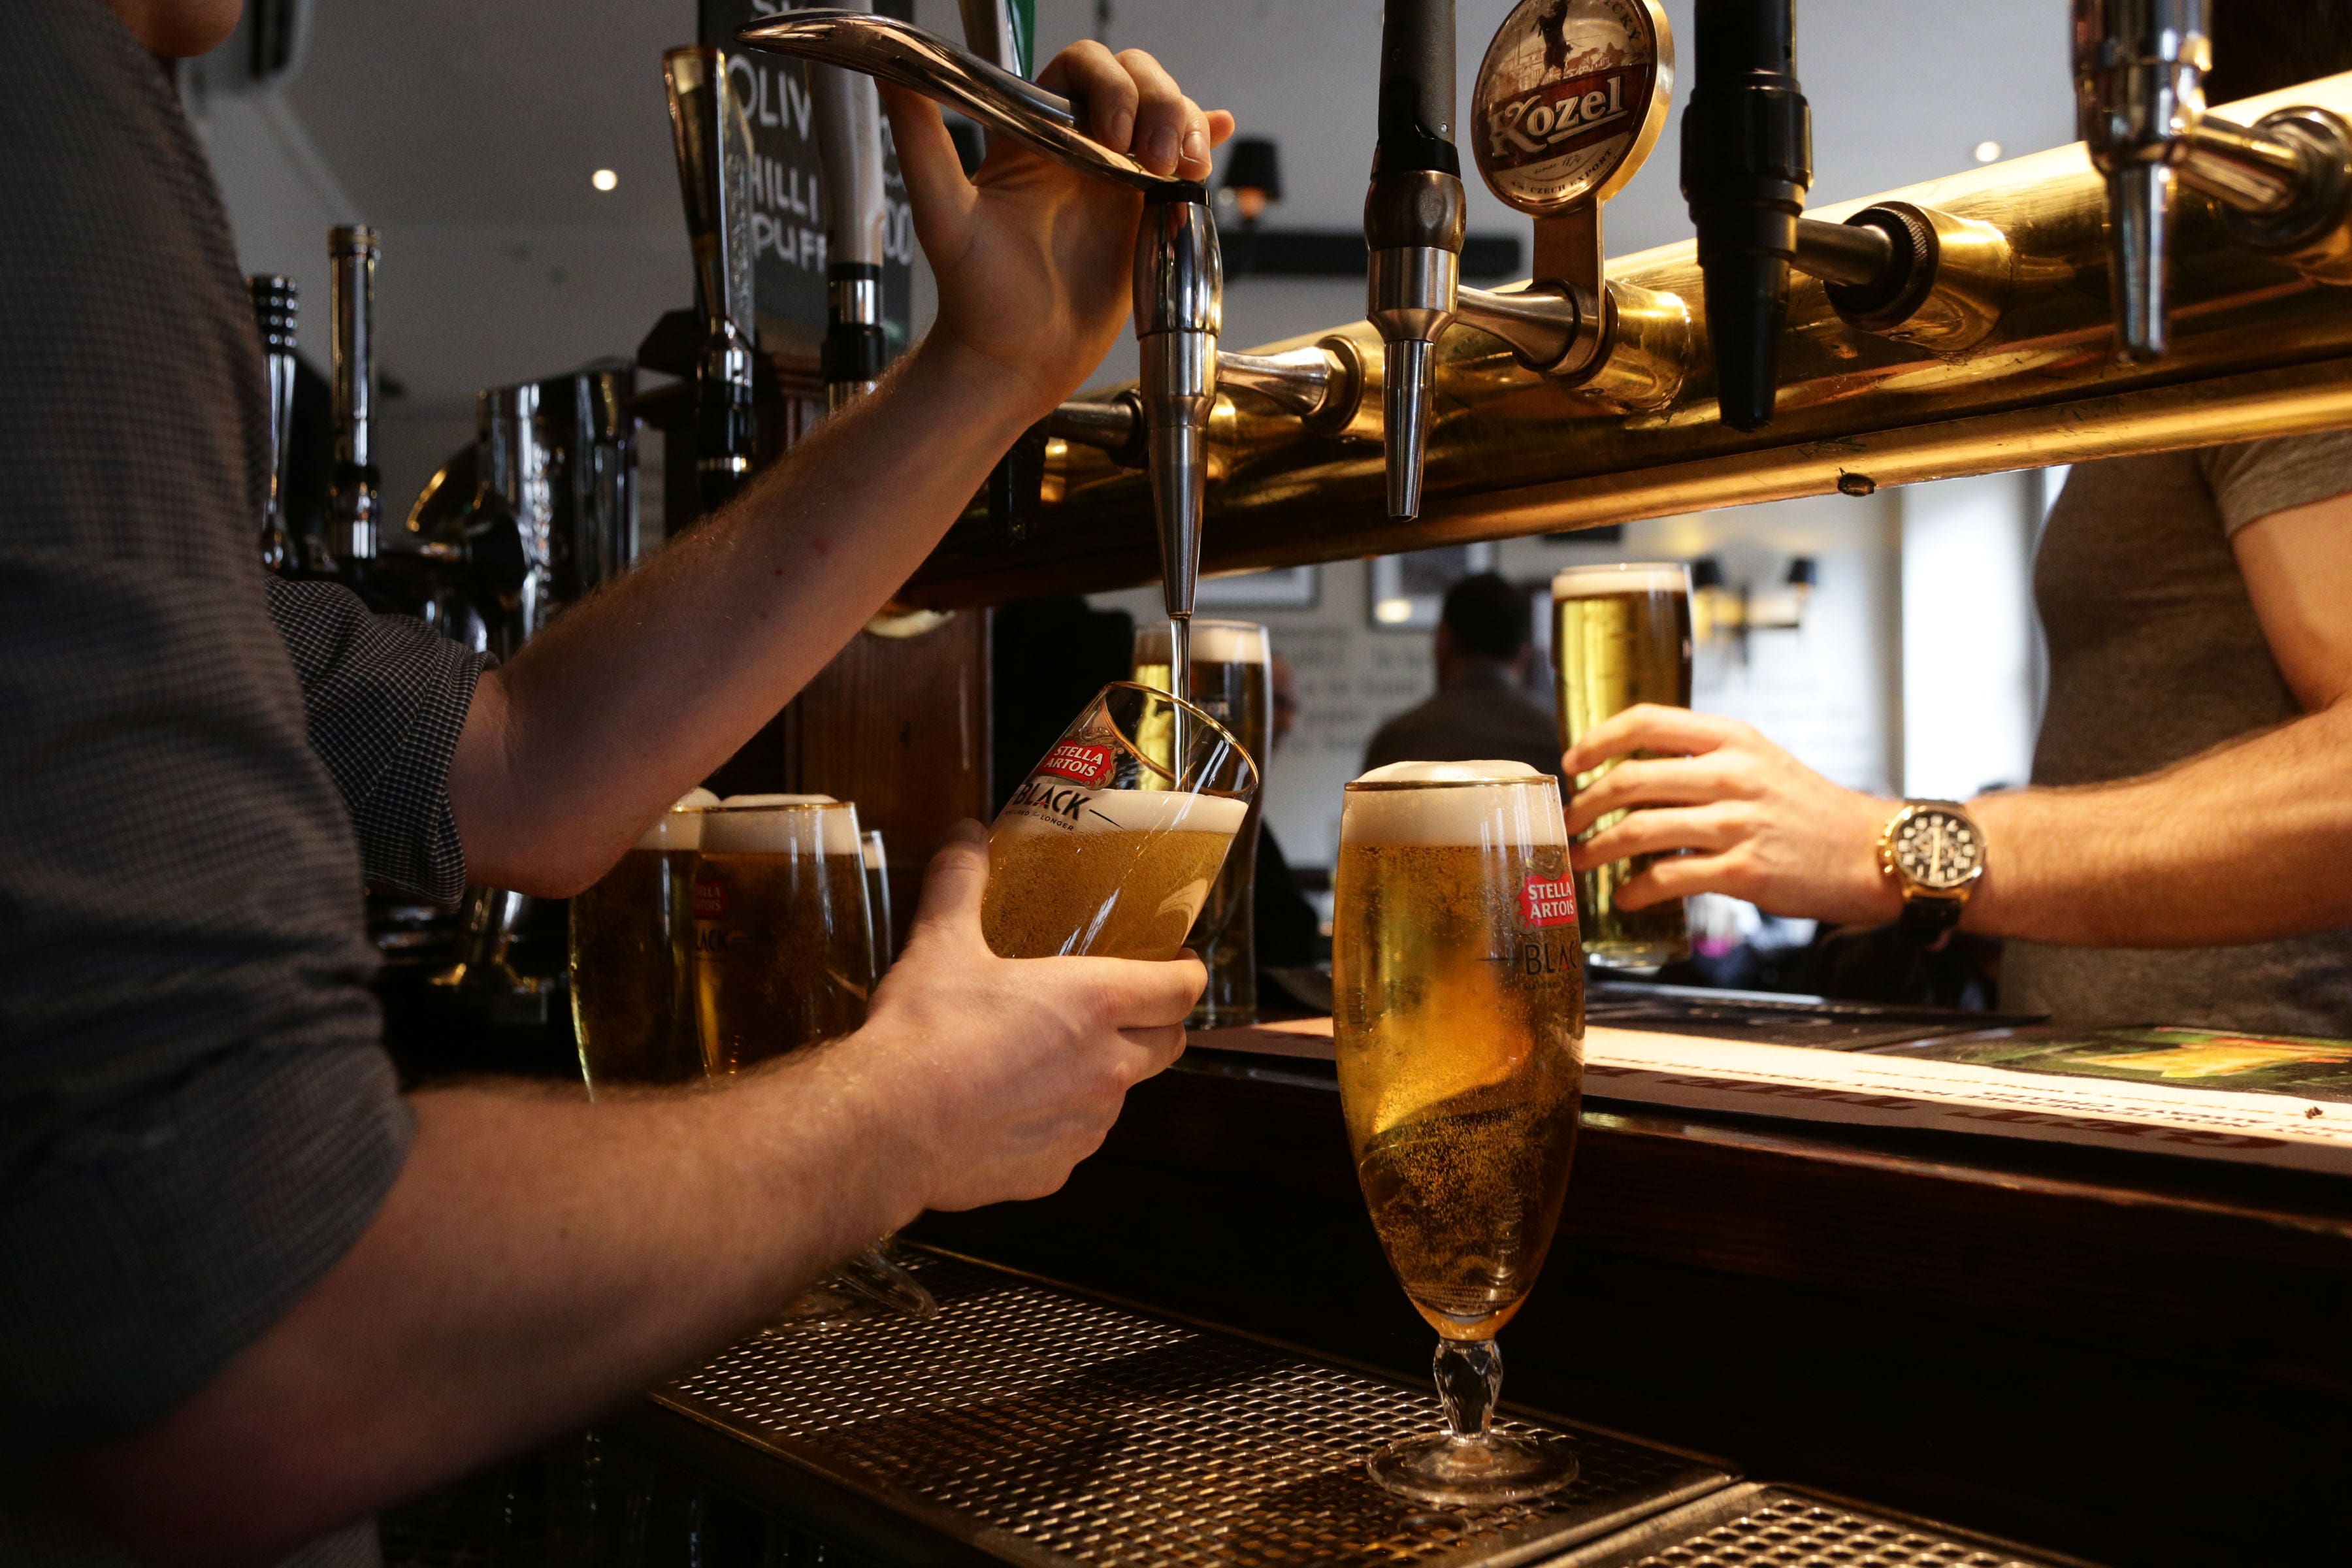 The price of beer has soared in recent years, with £7 pints not uncommon